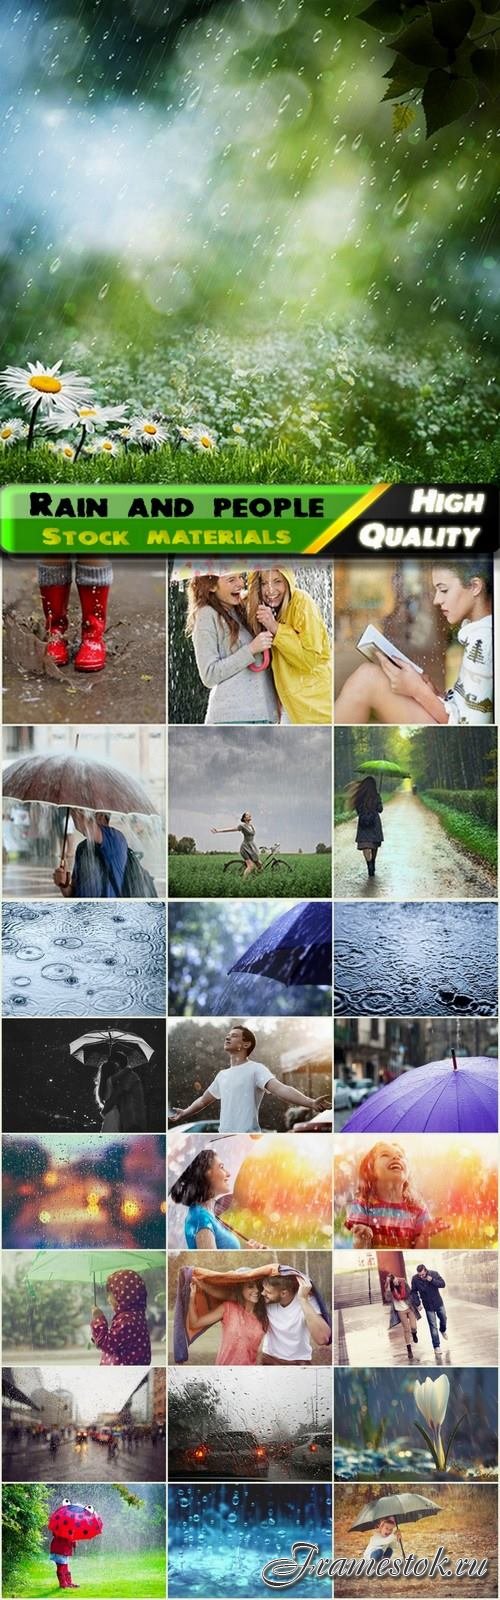 Bad weather with rain and people - 25 HQ Jpg